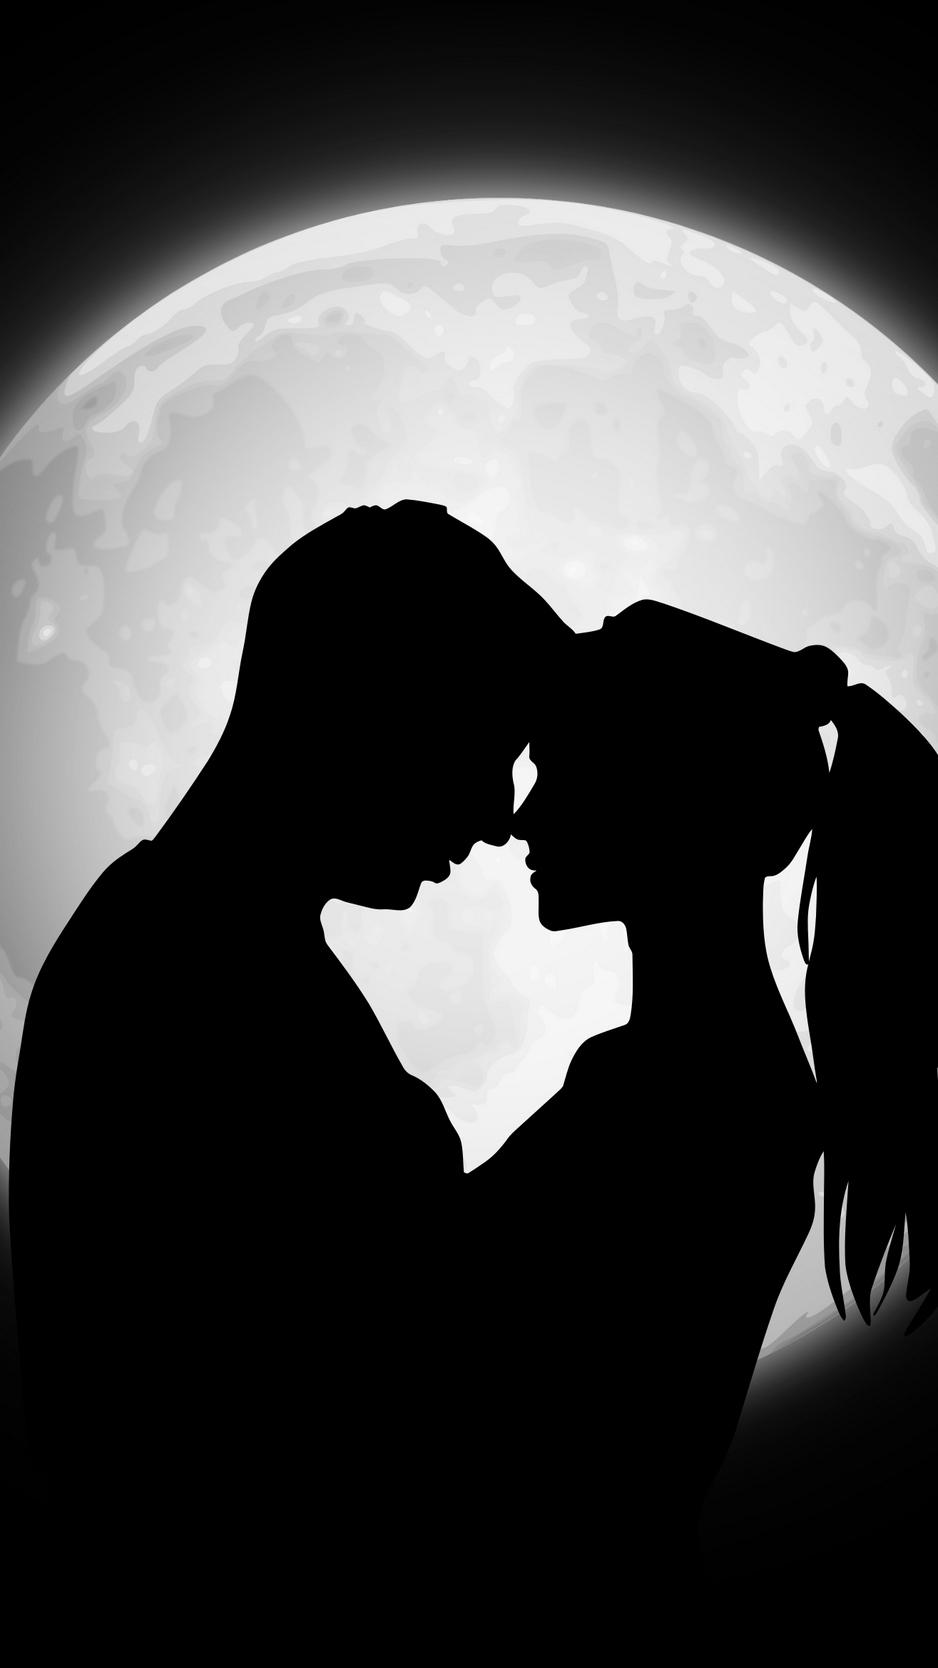 Download wallpaper 938x1668 couple, silhouettes, moon, love iphone